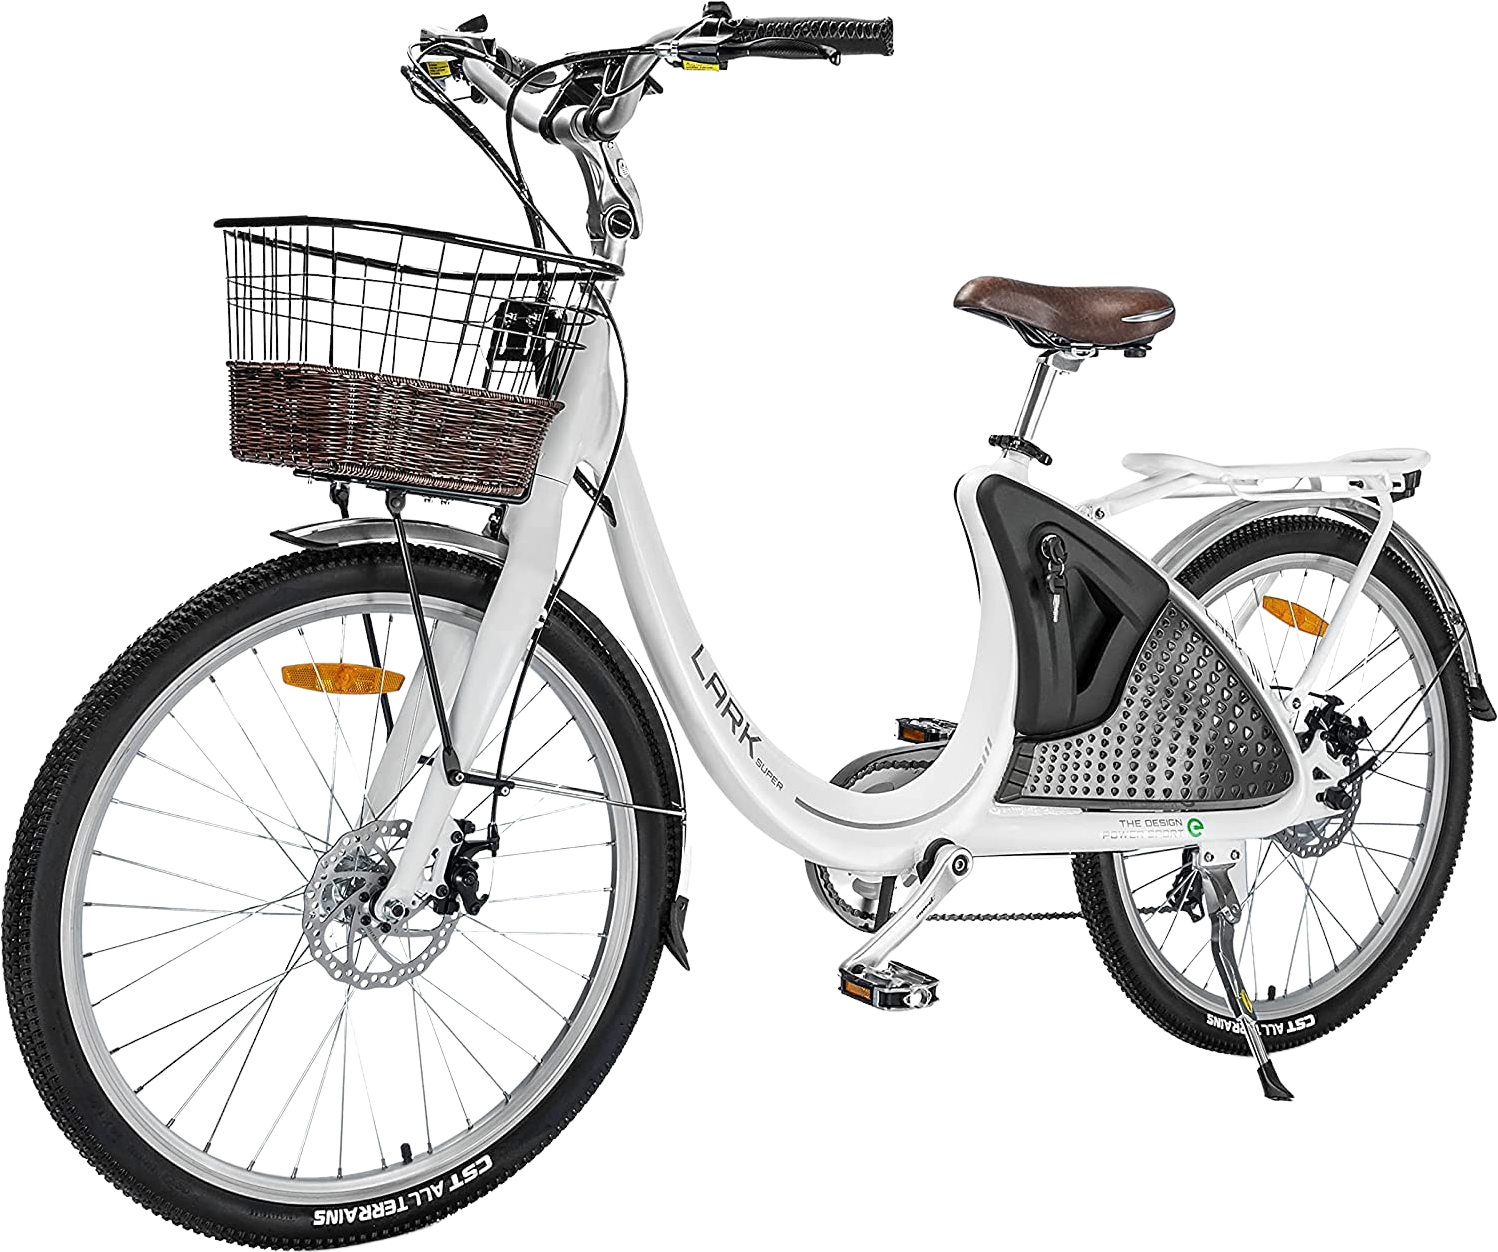 Ecotric, Ecotric Lark E-Bike 36V 10AH 500W 20 MPH City Bike For Women with Basket and Rear Rack White NS-LAK26LCD-W New